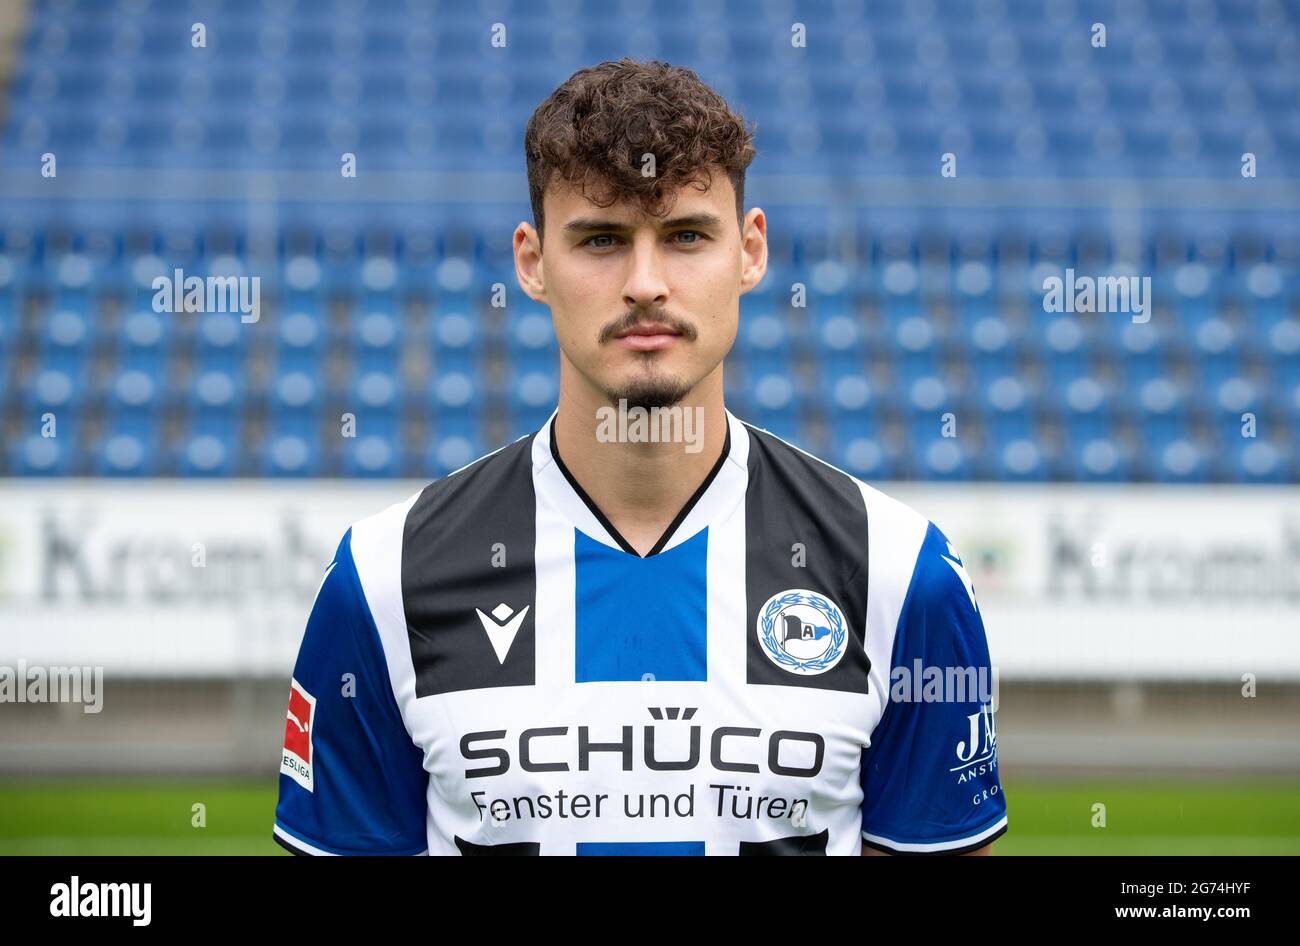 Bielefeld, Germany. 09th July, 2021. Football: Bundesliga, photo  opportunity Arminia Bielefeld for the 2021/22 season at the Schüco Arena:  player Janni Luca Serra. Credit: Friso Gentsch/dpa - only for use in  accordance